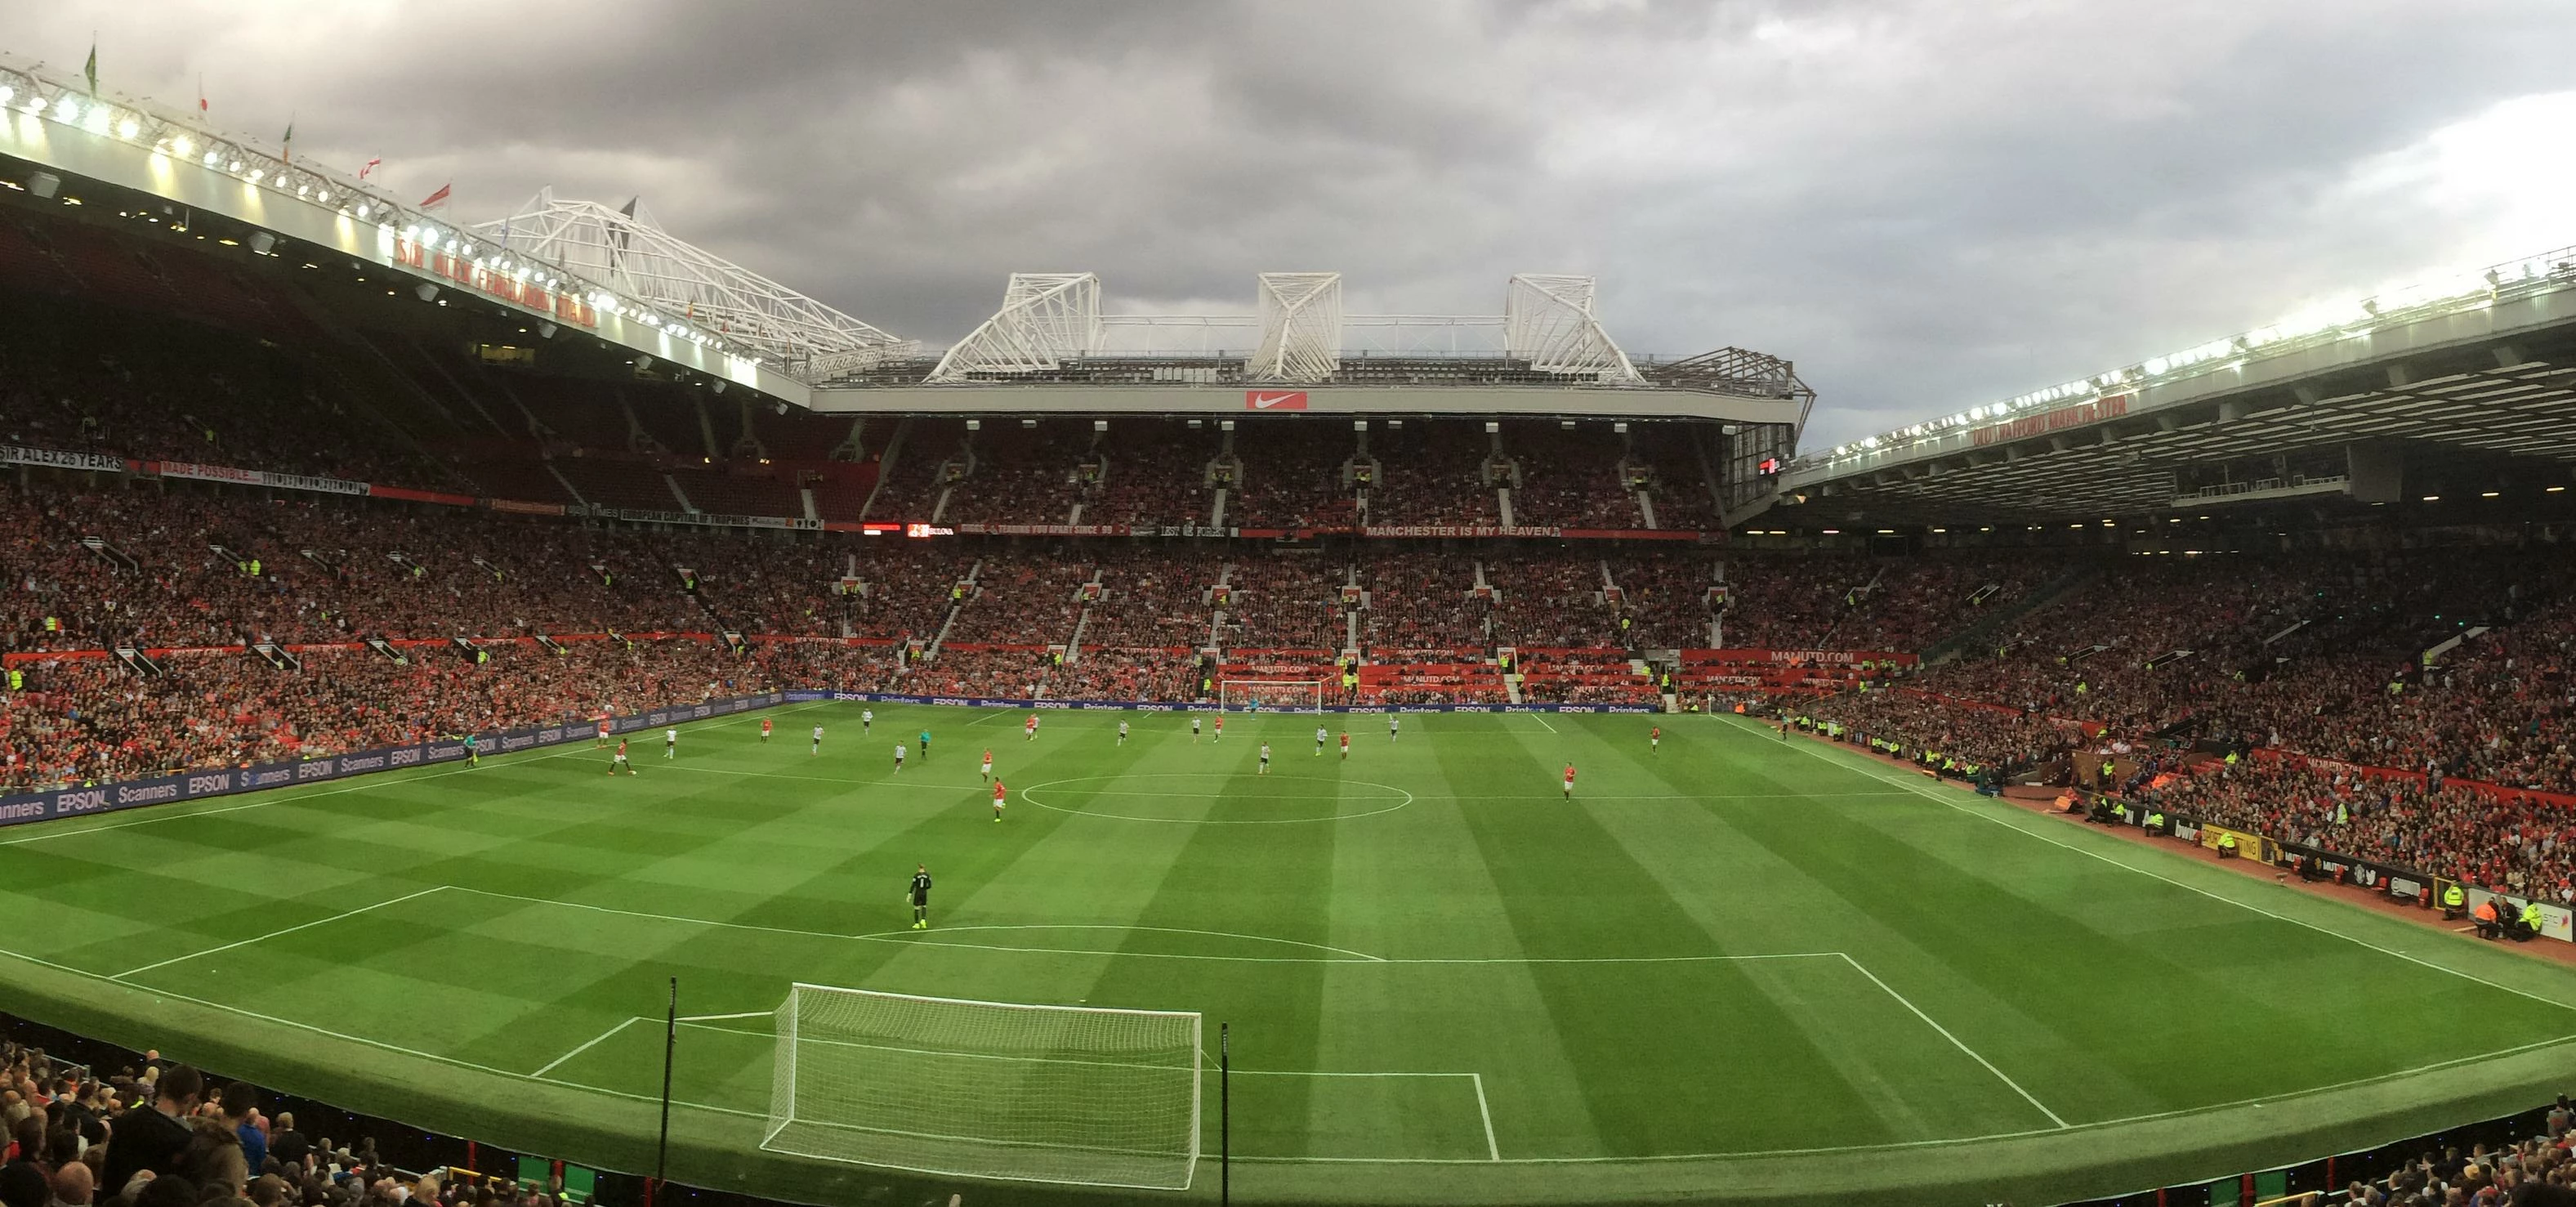 Inside Old Trafford, The Theatre of Dreams